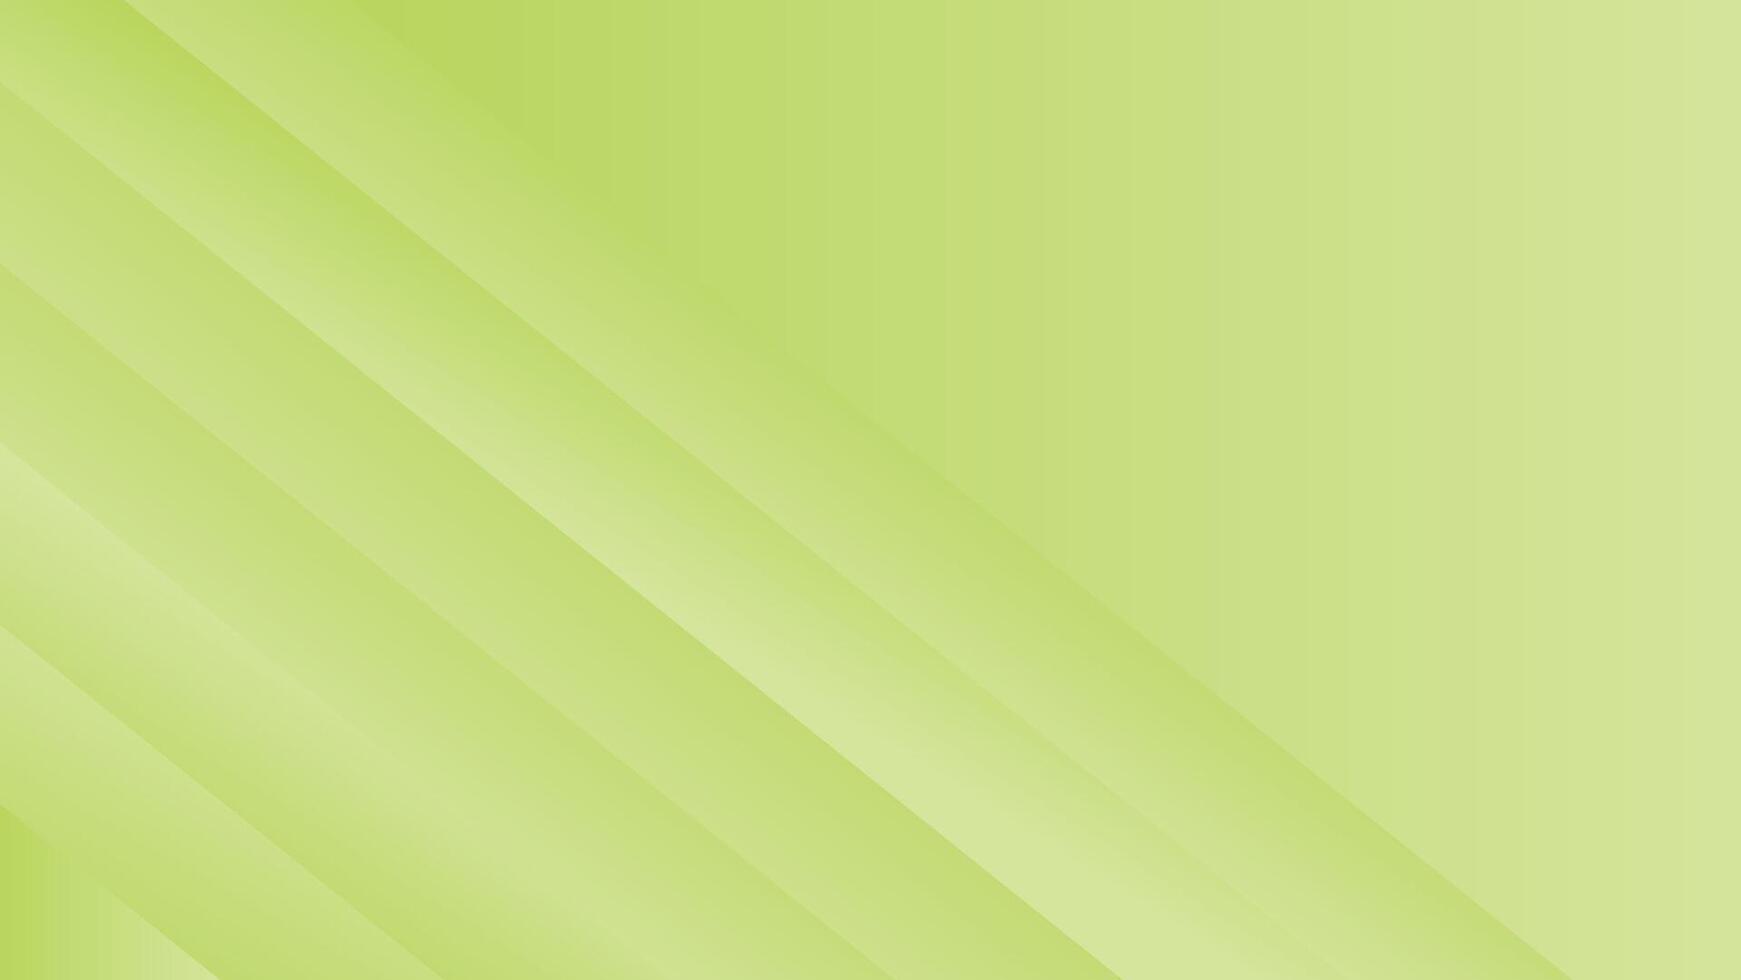 green abstract background with decorative lines vector